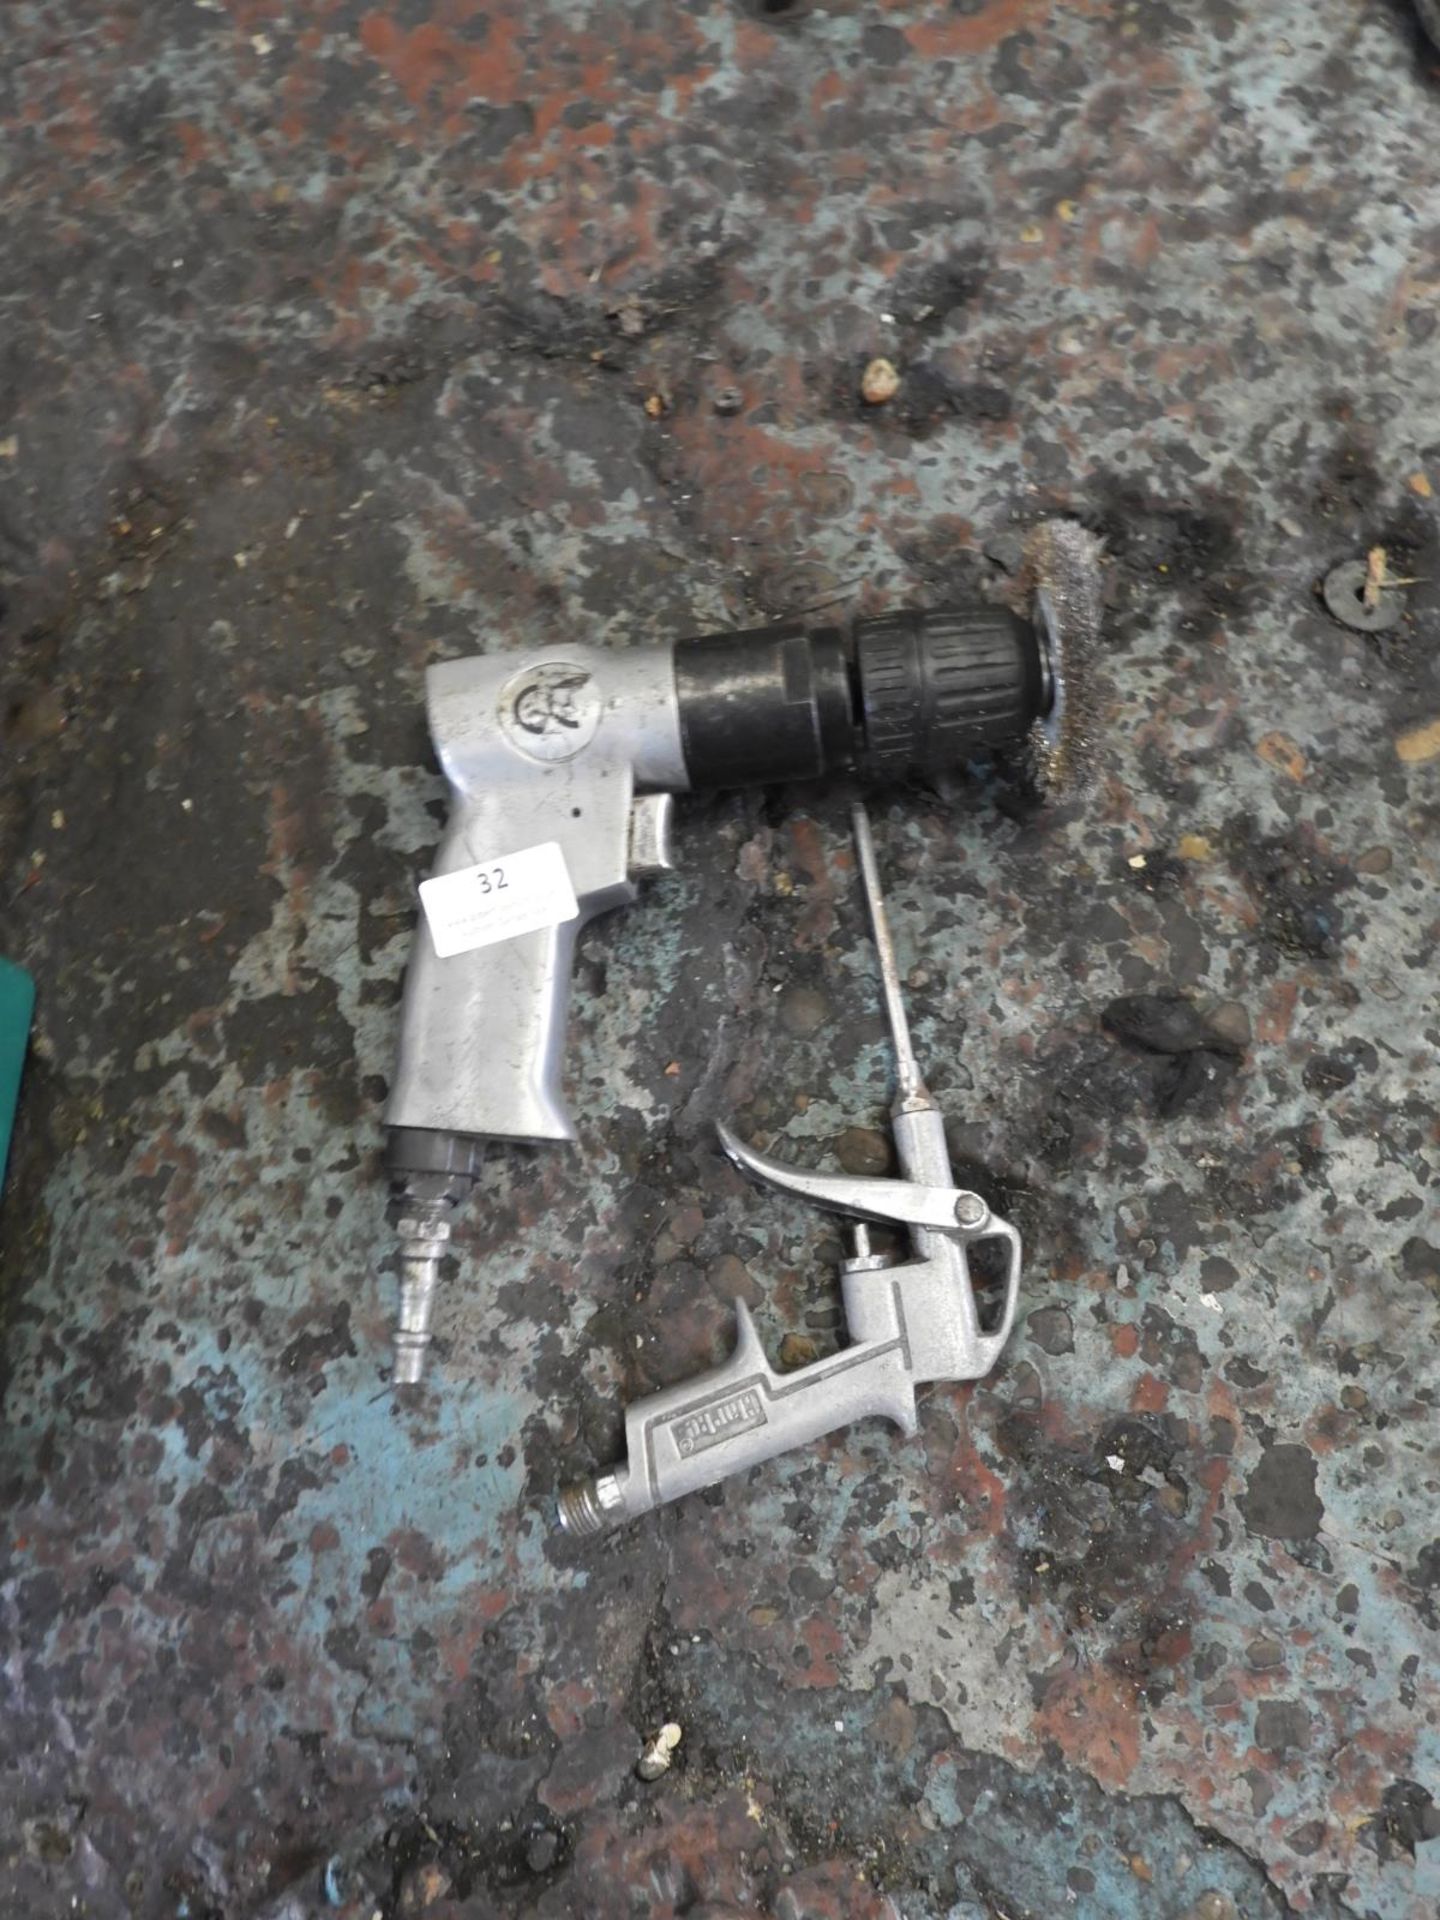 Pneumatic Drill with Keyless Chuck, and a Blower